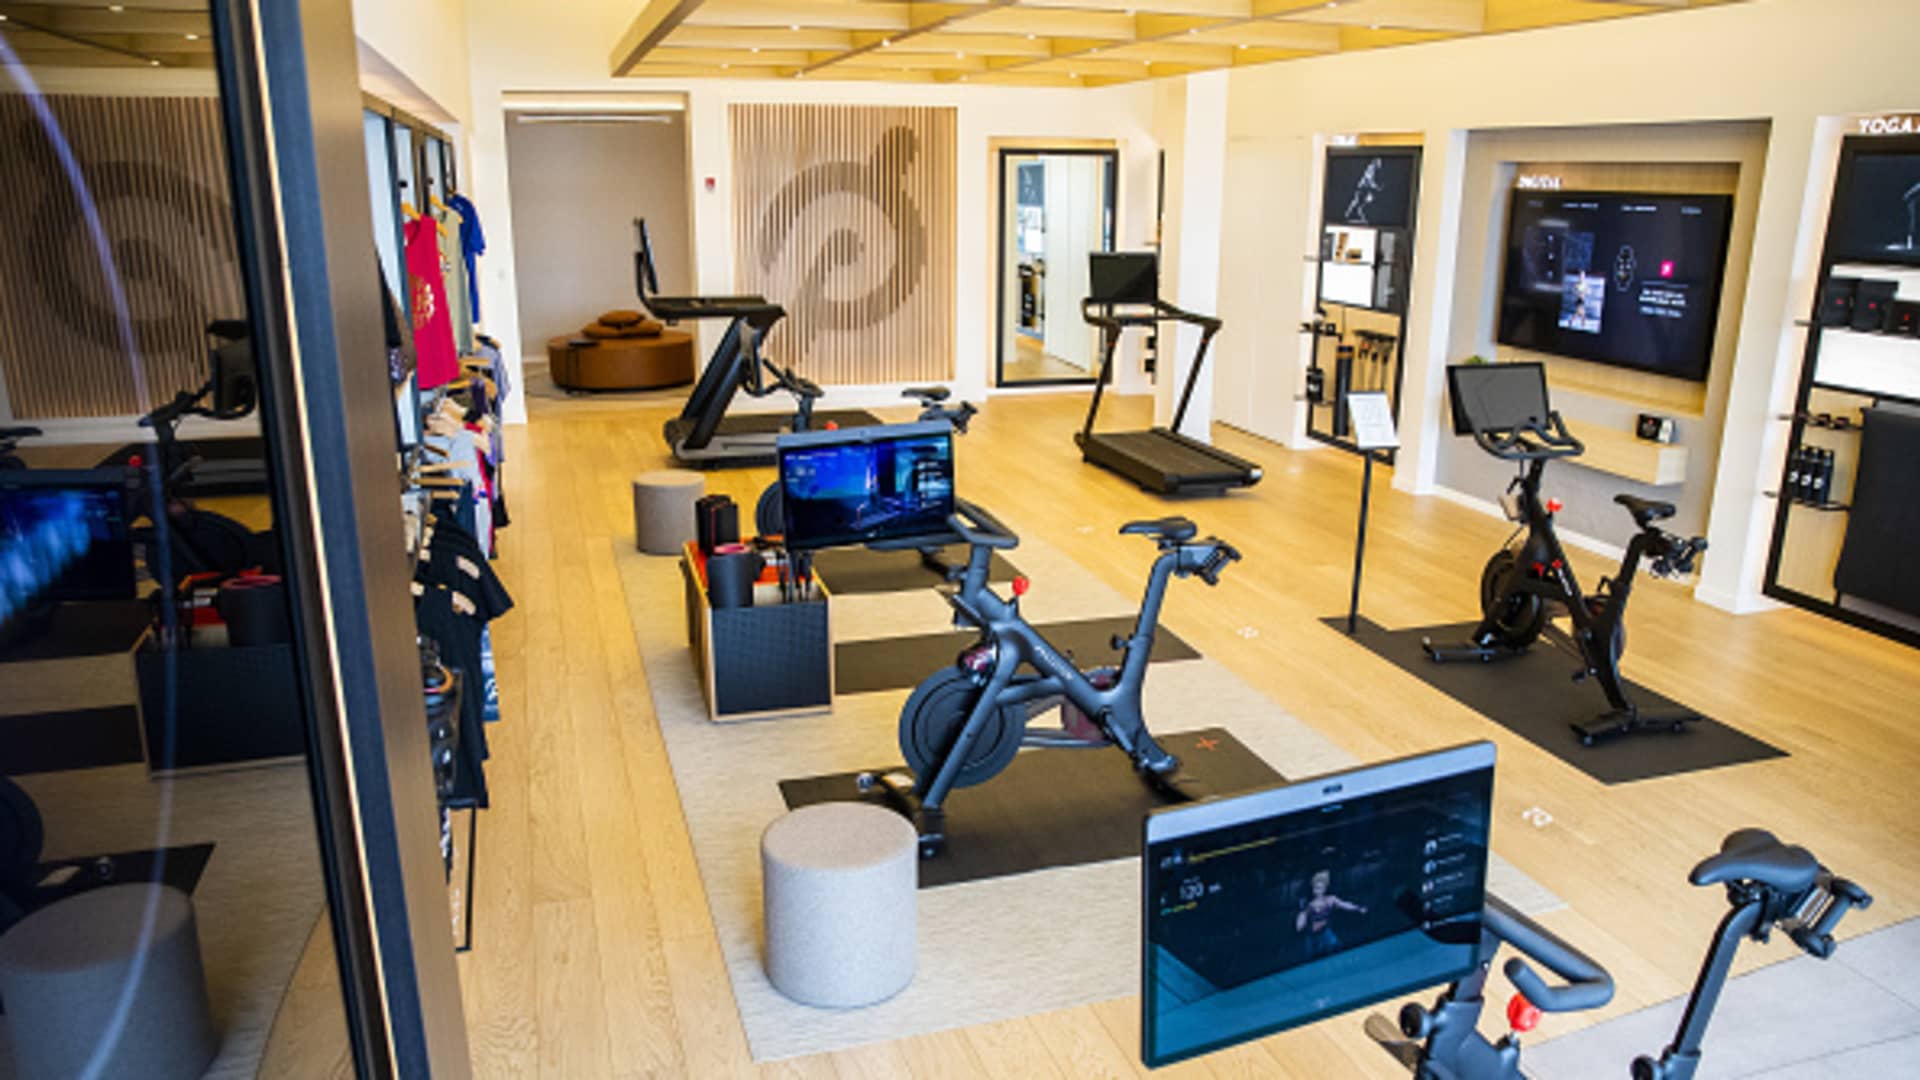 Exercise equipment and apparel for sale at the Peloton Interactive Inc. showroom in Dedham, Massachusetts, U.S., on Wednesday, Feb. 3, 2021.